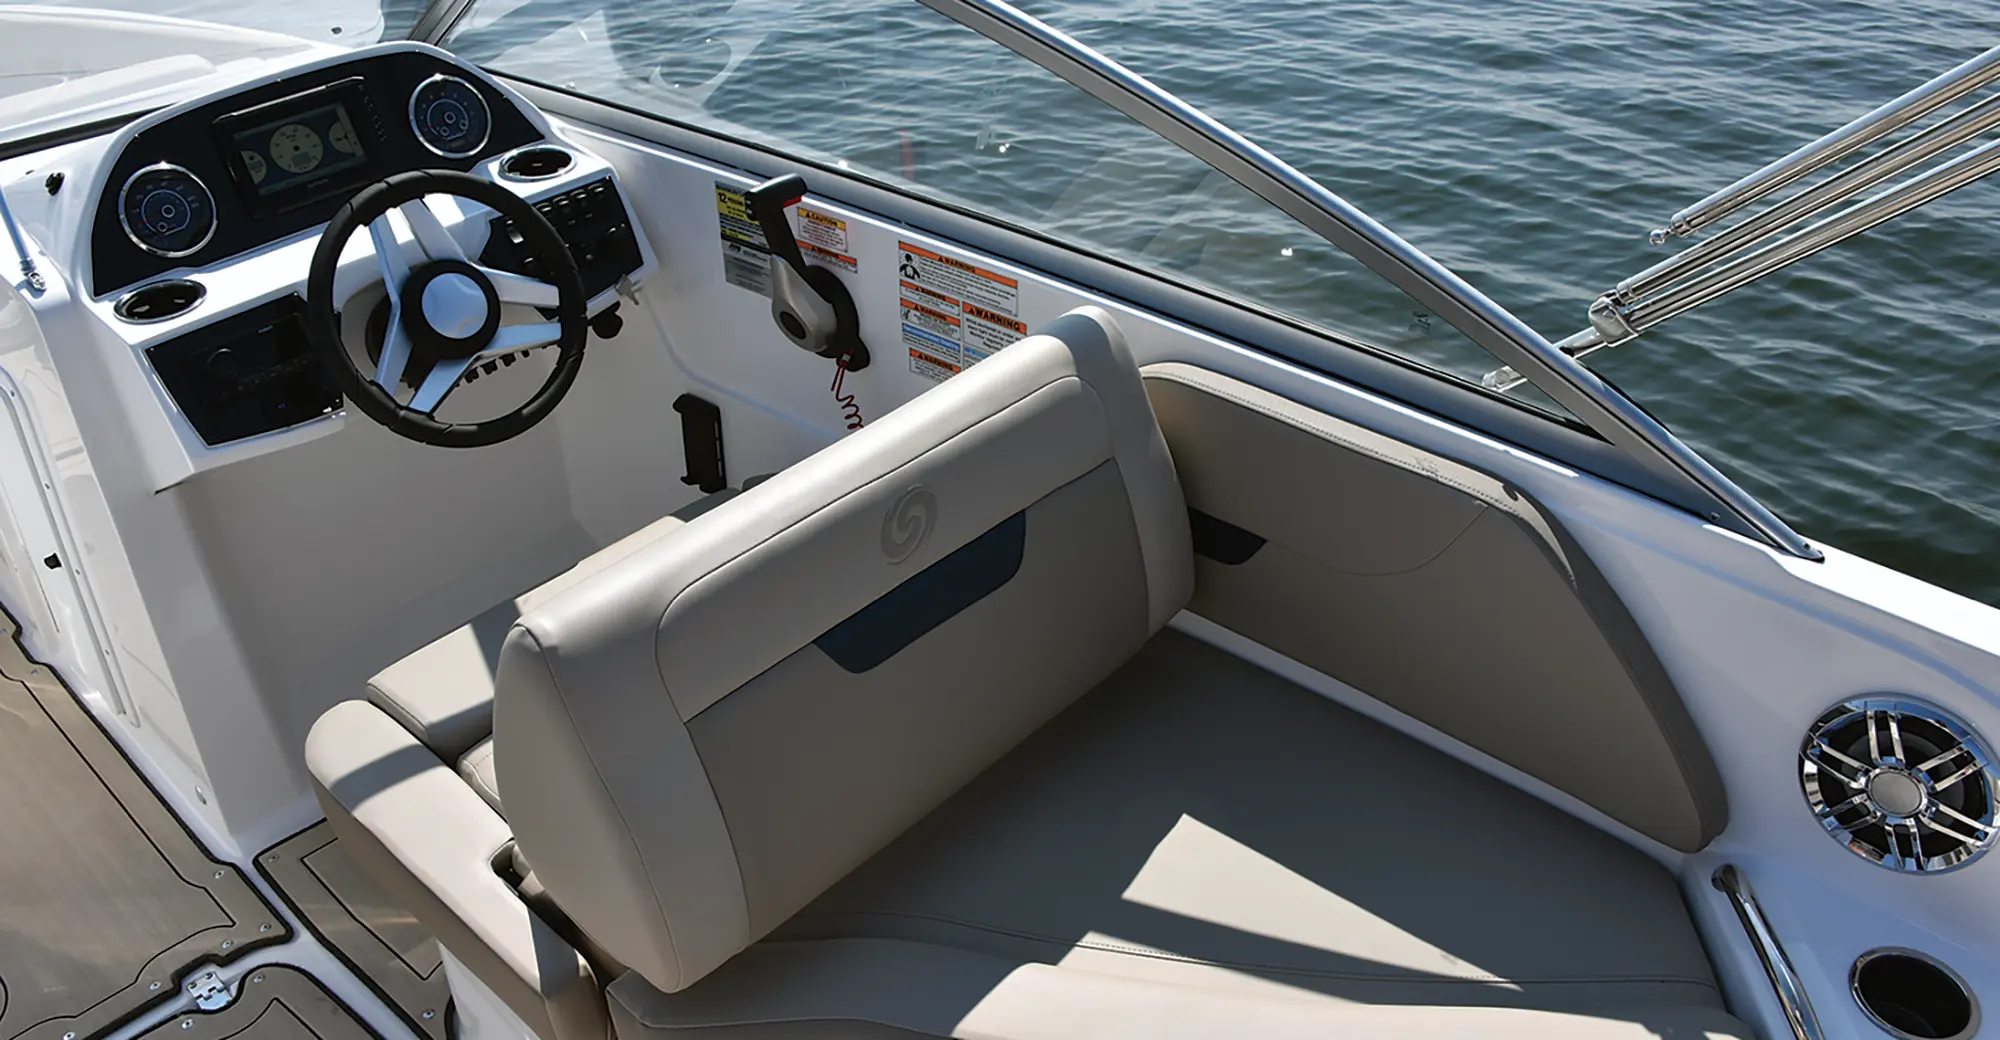 Aerial interior angle photo view of the driver's seat area plus a lounge couch behind the driver's seat of the Hurricane SunDeck 235 pontoon motorboat vehicle